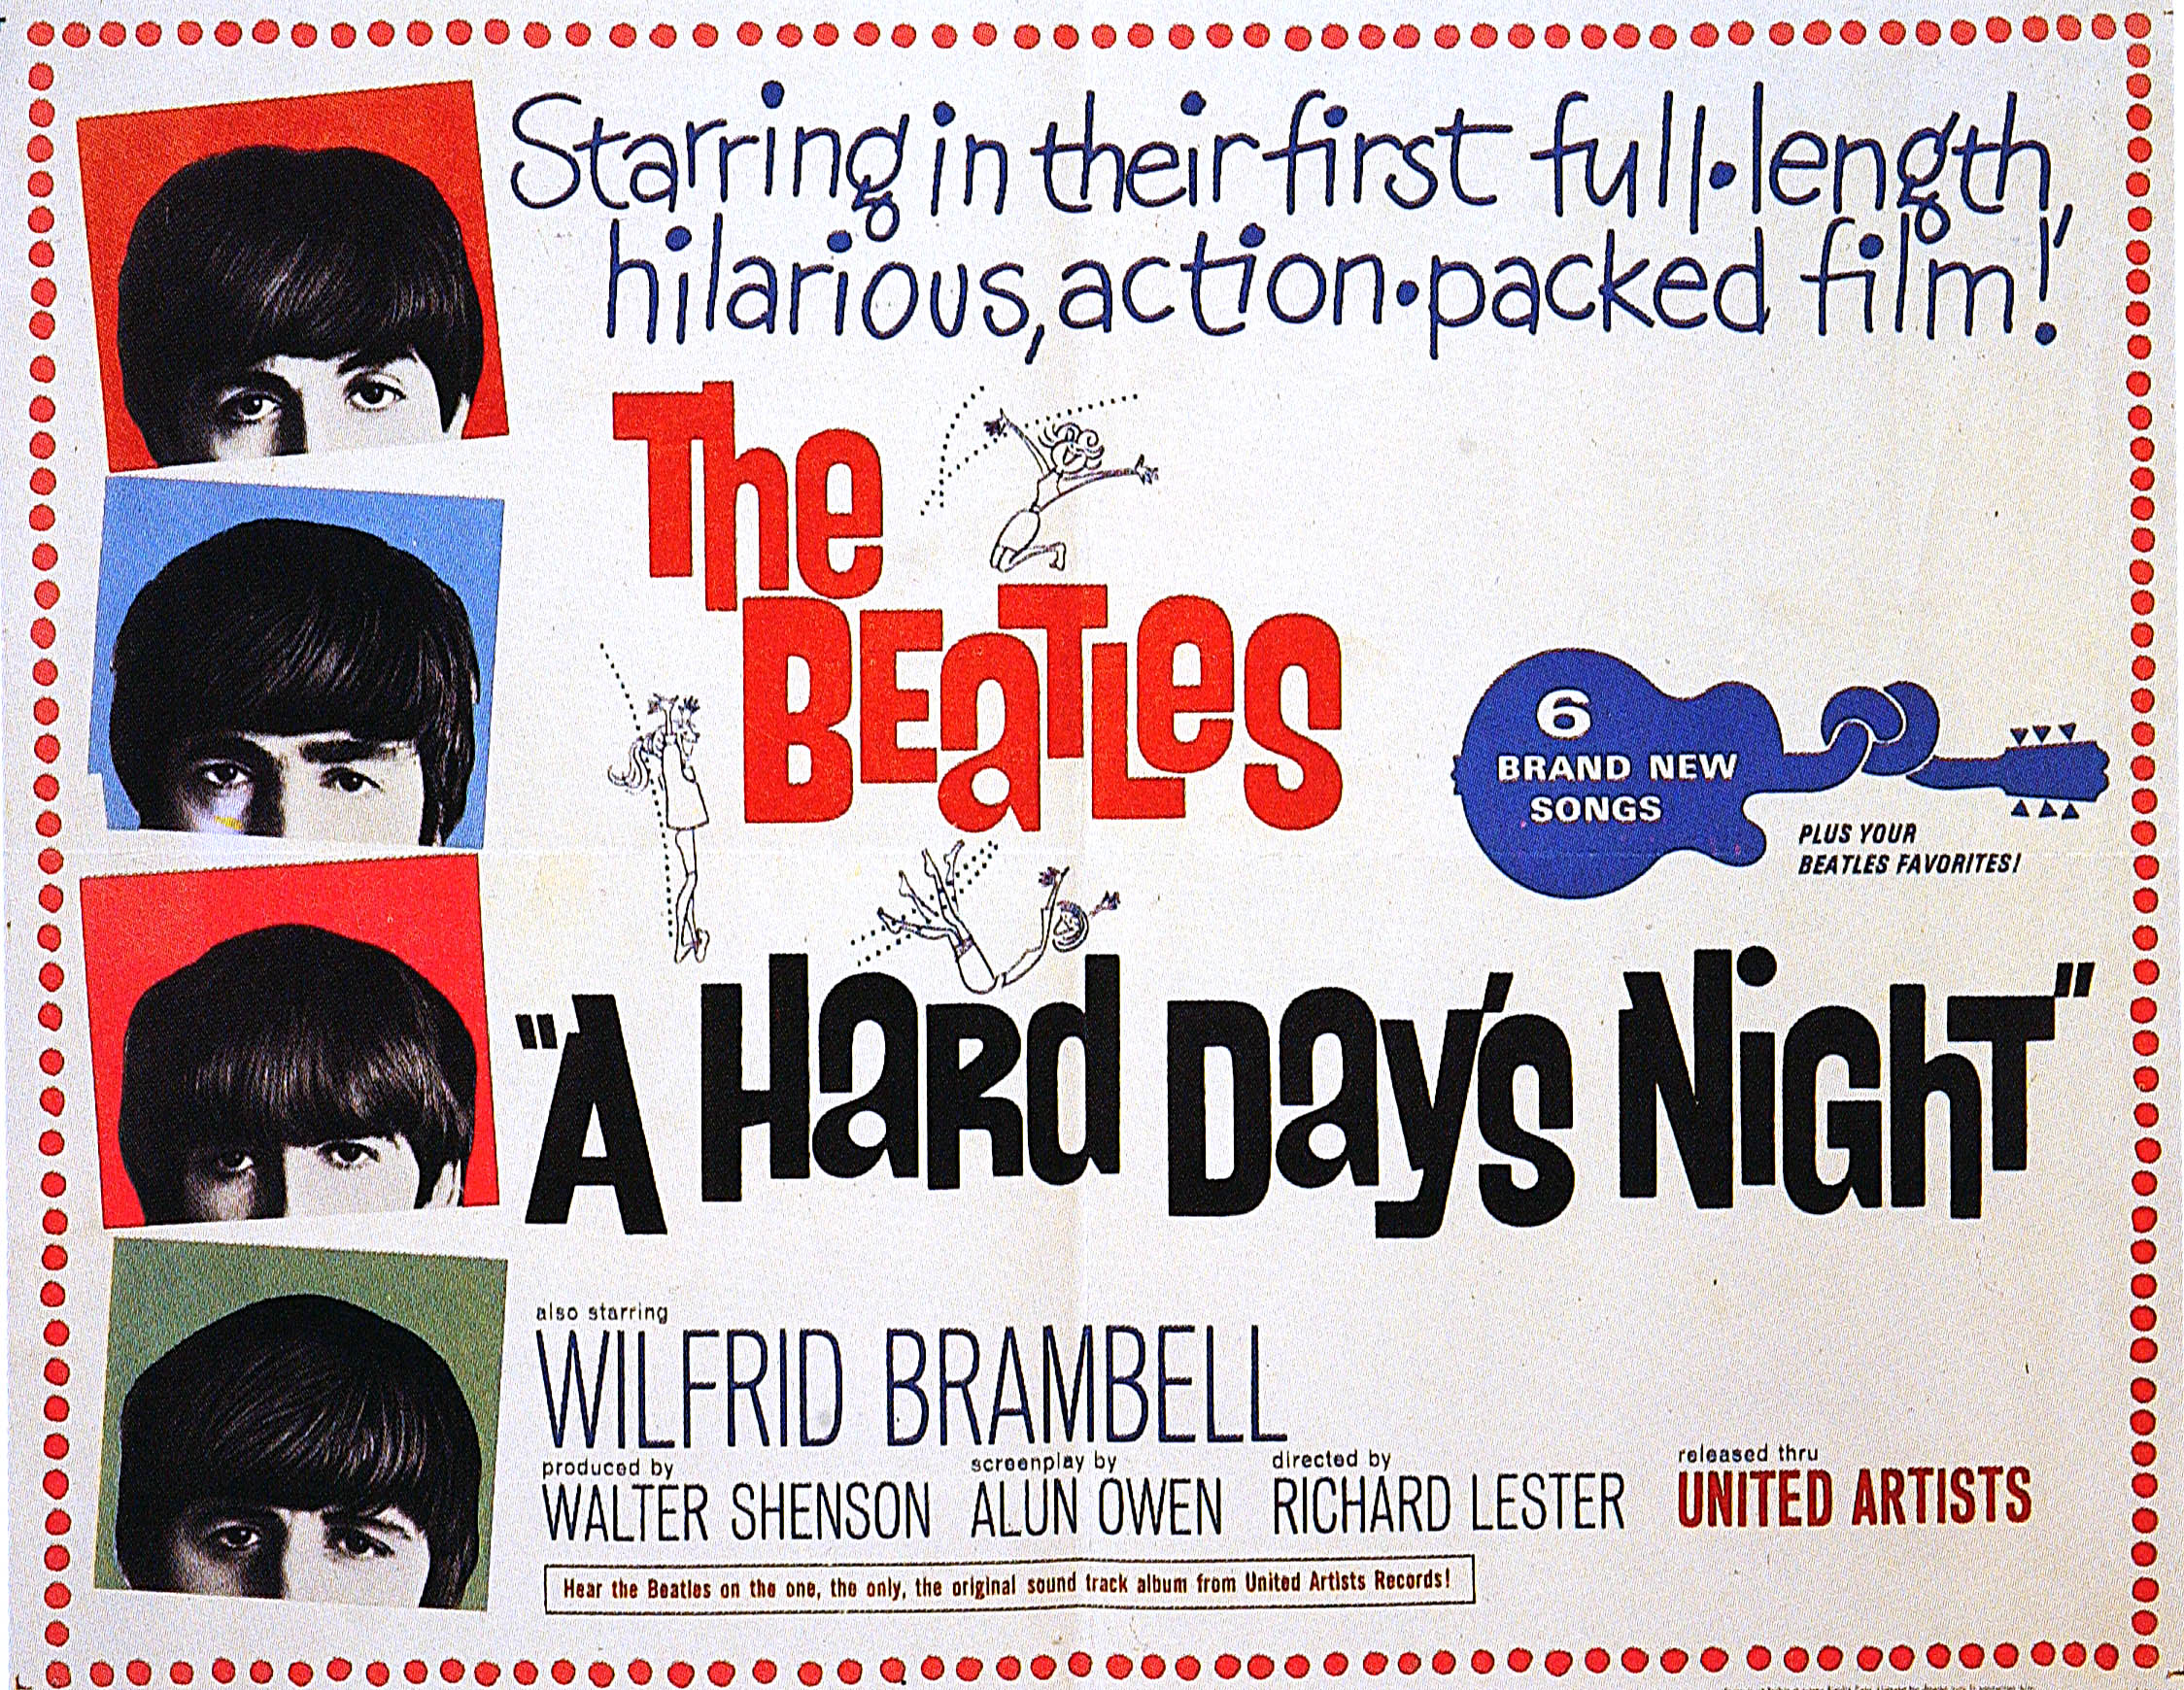 A poster The Beatles 'A Hard Day's Night' with a red border